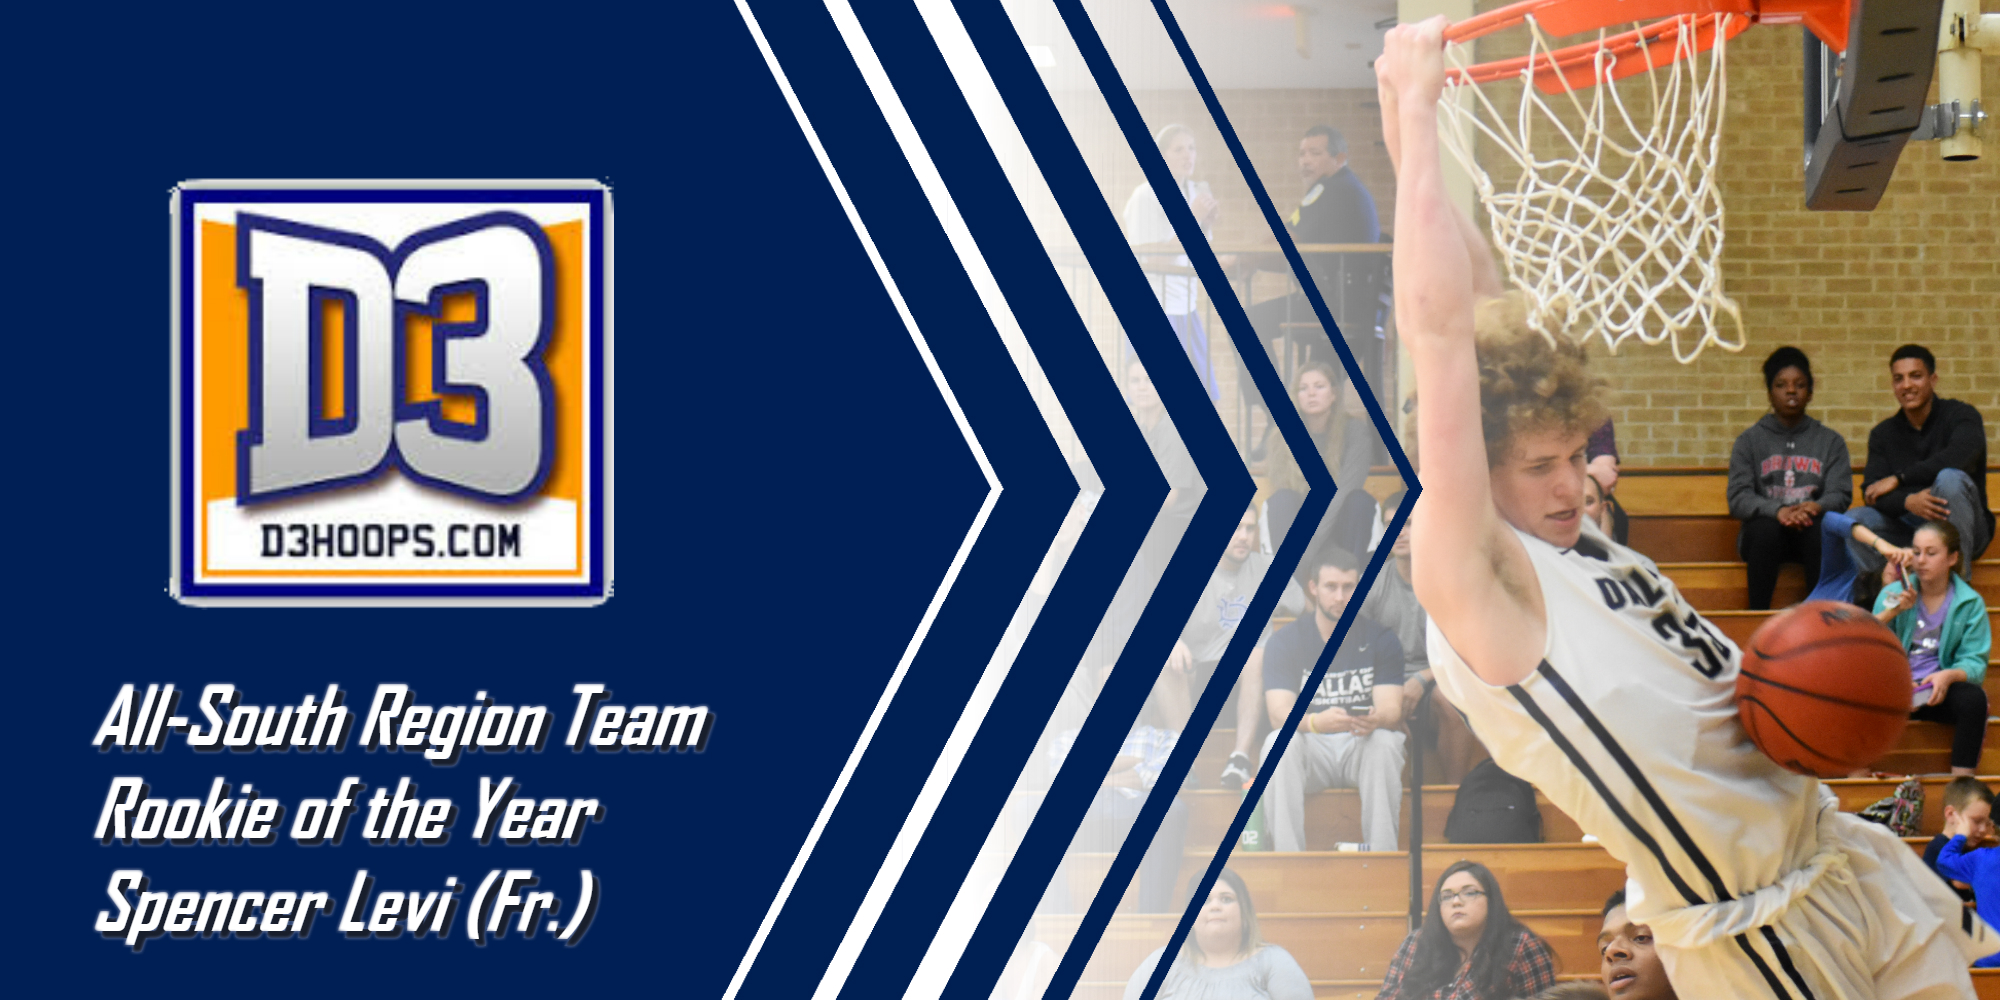 Levi continues to add to his postseason honors by being recognized on D3Hoops.com All-South Region Team.